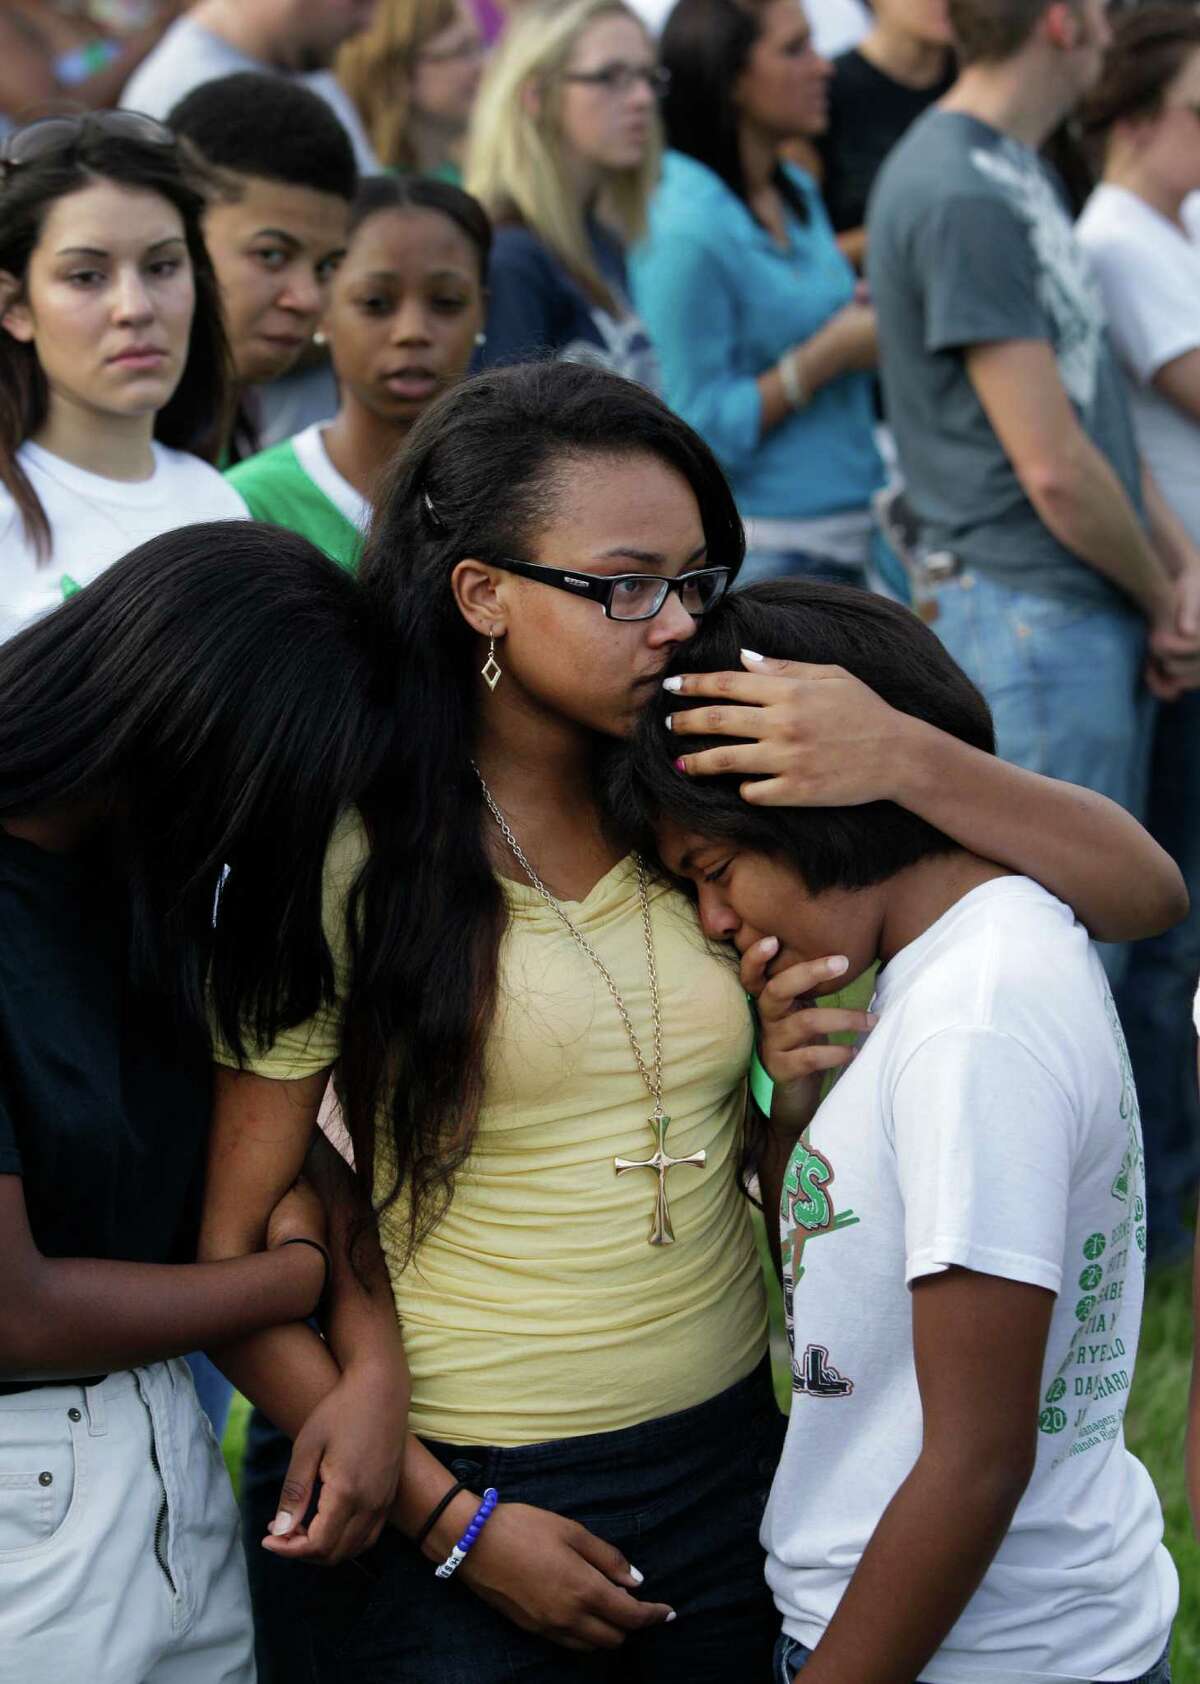 Justice Comeaux, left, a junior, Monique Sutton, center, a junior, Lavonne Williams, right, a junior, hug during gathering with more than 200 people to pray outside Spring High School Sunday, Sept. 8, 2013, in Spring. Students will return to classes on Monday to the school where Joshua Broussard, 17, a Spring High School student was fatally stabbed and three others injured at the school Wednesday, Sept. 3, 2013. Luis Alonzo Alfaro, 17, has been charged with murder.